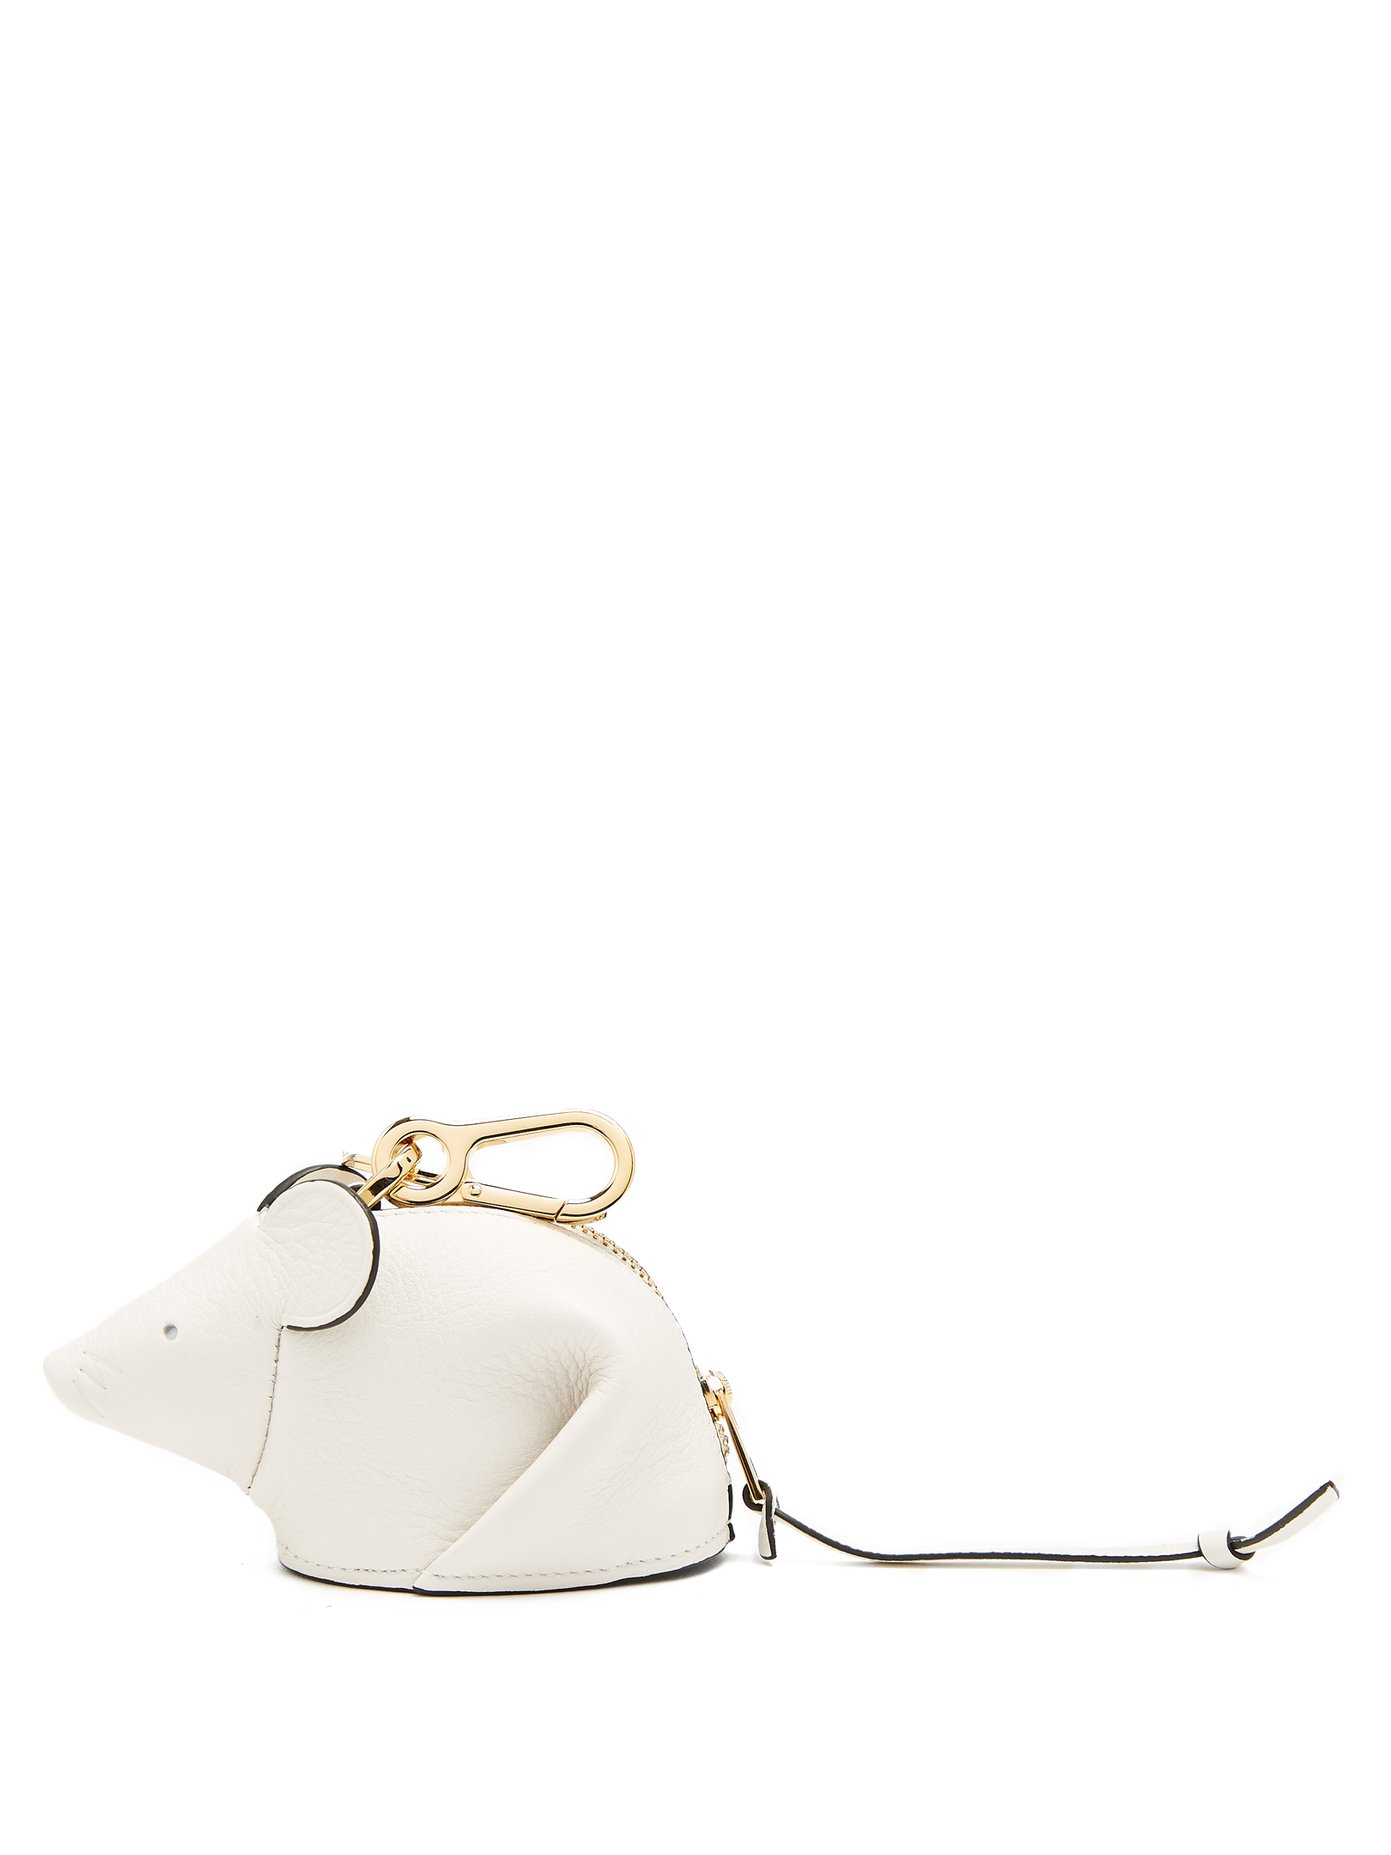 Mouse coin purse | Loewe 